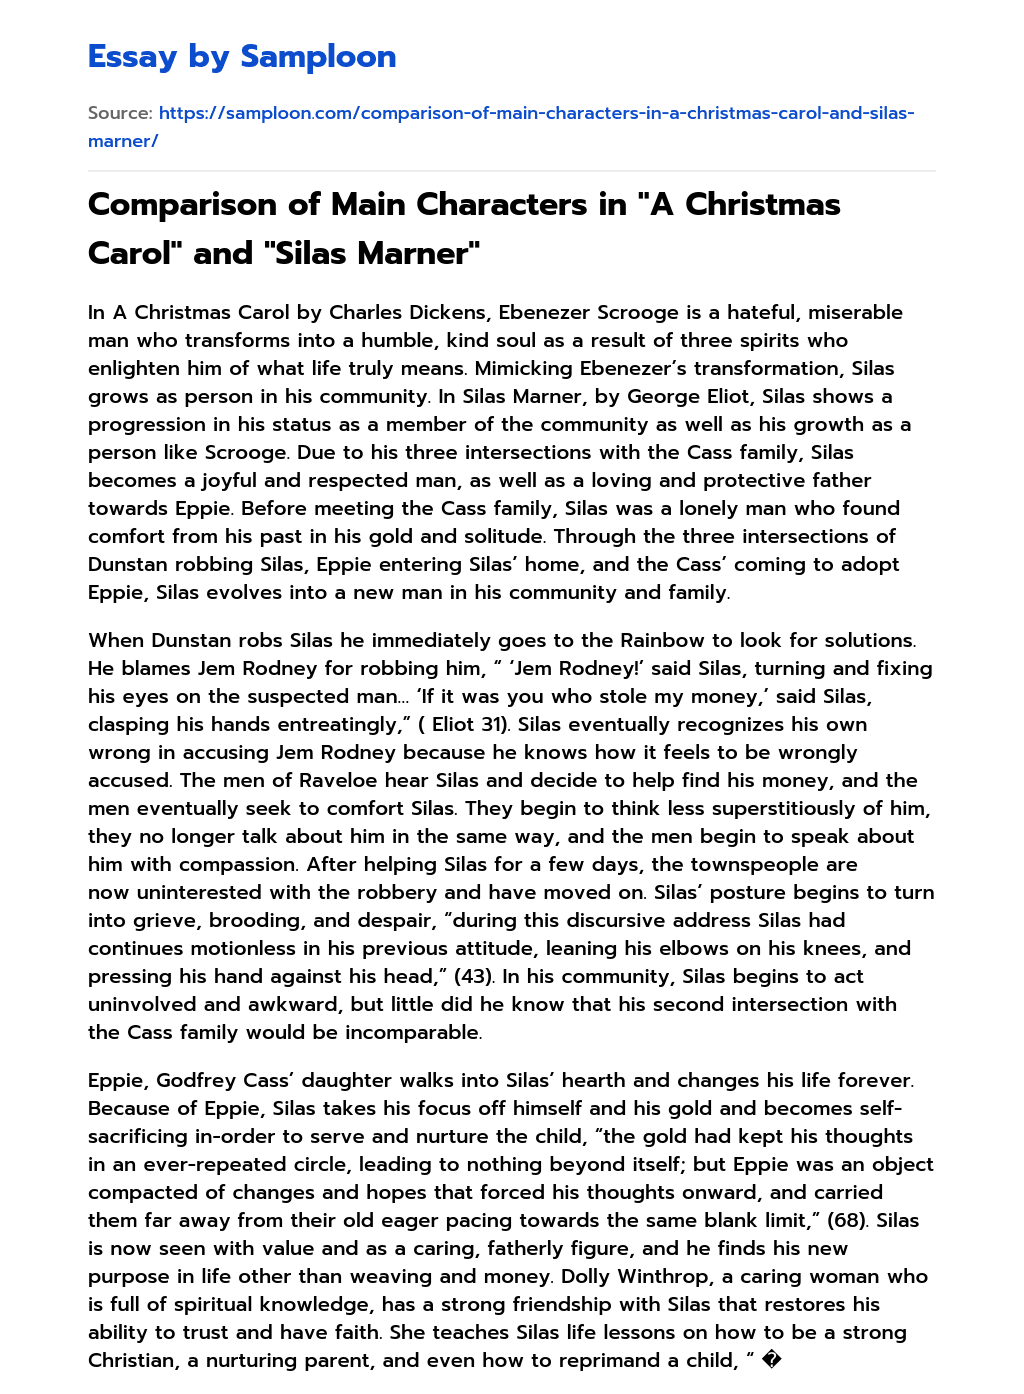 Comparison of Main Characters in “A Christmas Carol” and “Silas Marner” essay